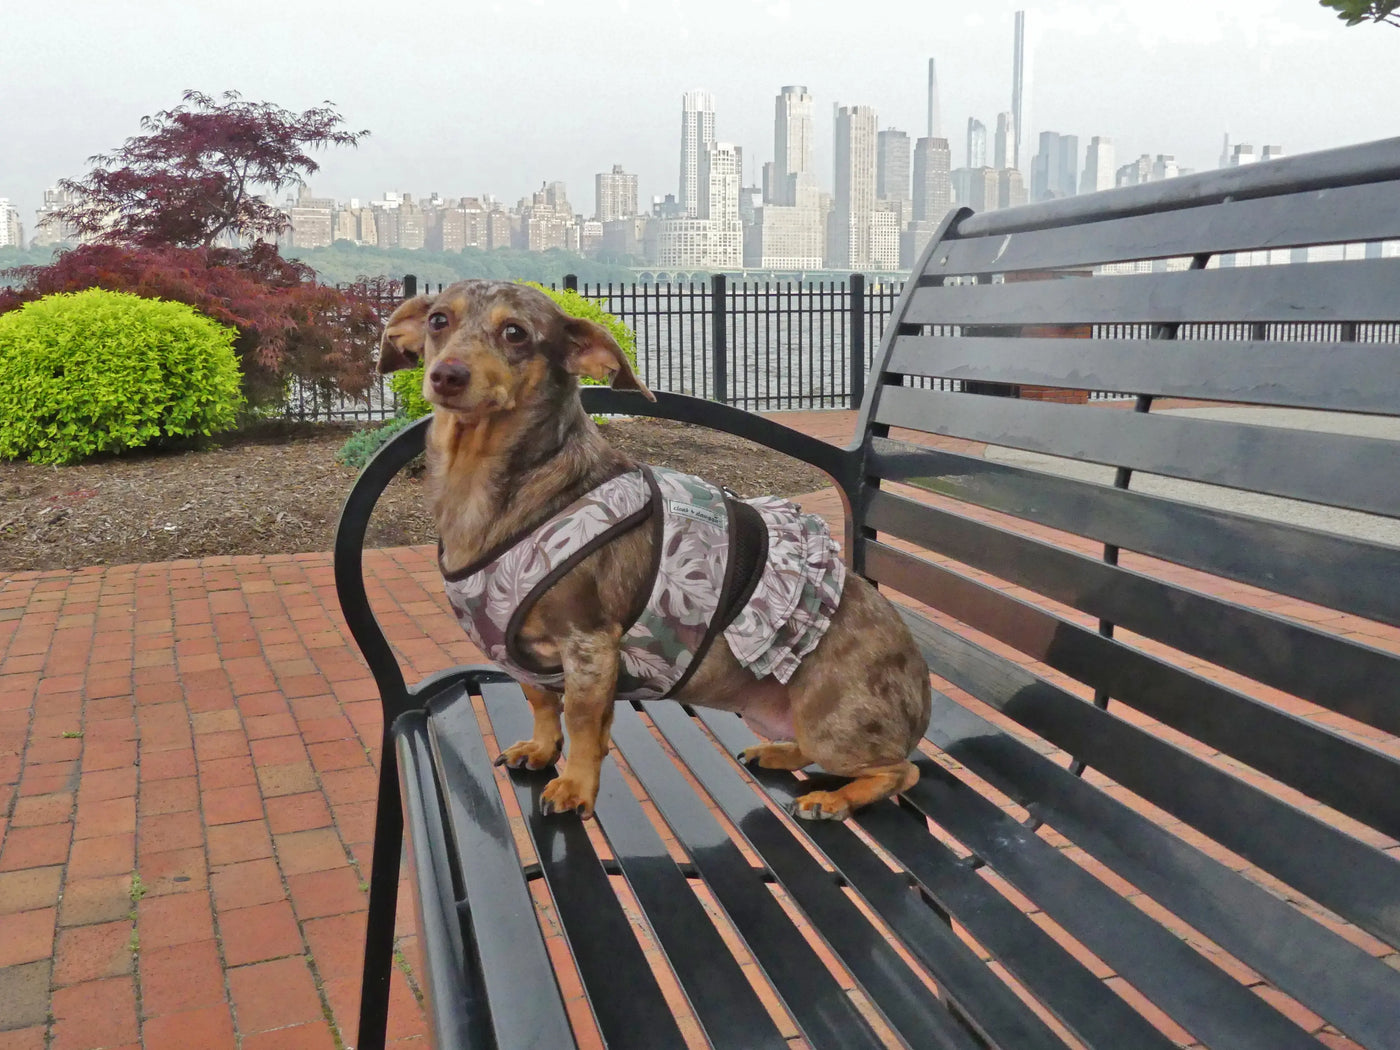 Floral Camo Harness dress on a dog sitting on a bench